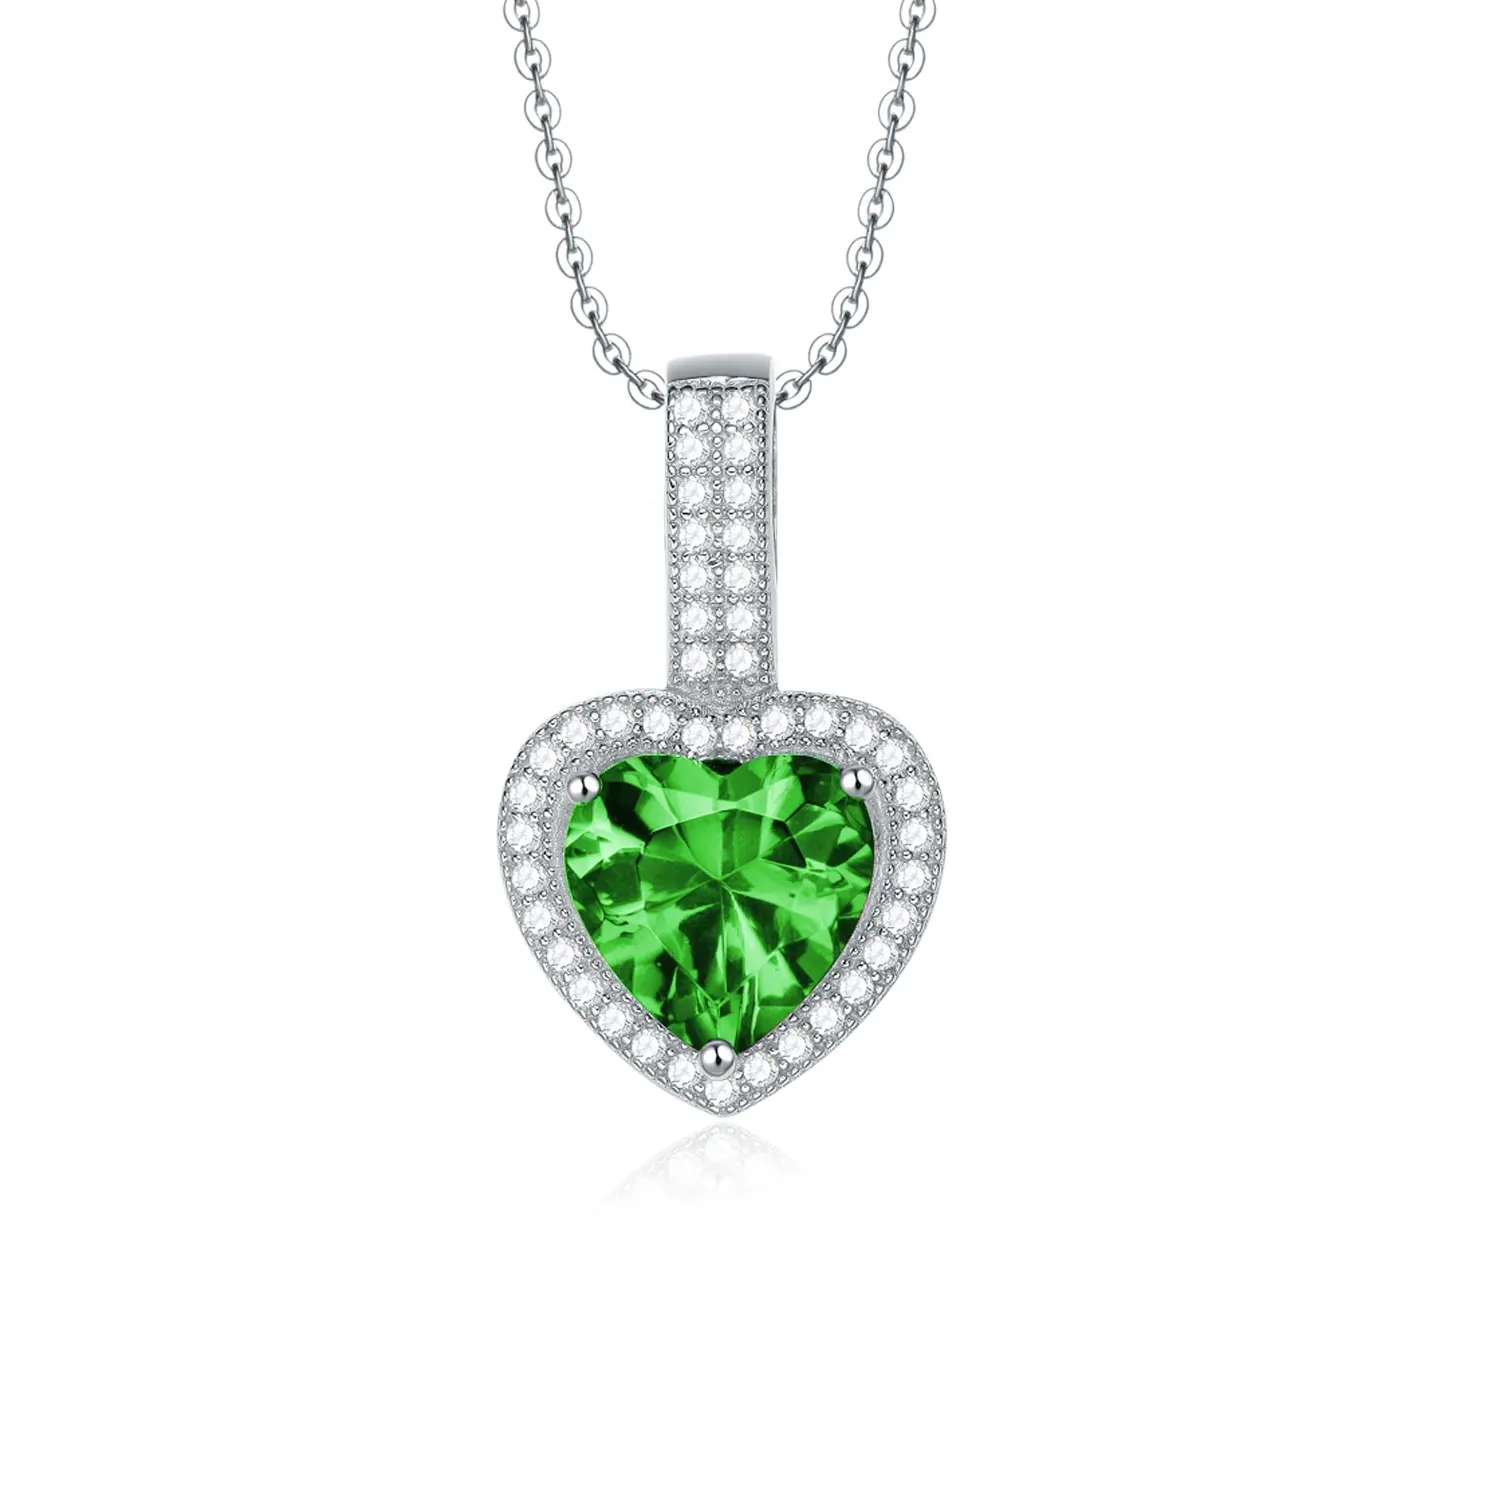 Manufacture women jewelry necklaces rhodium plated emerald color CZ sterling silver 925 pendant heart necklace